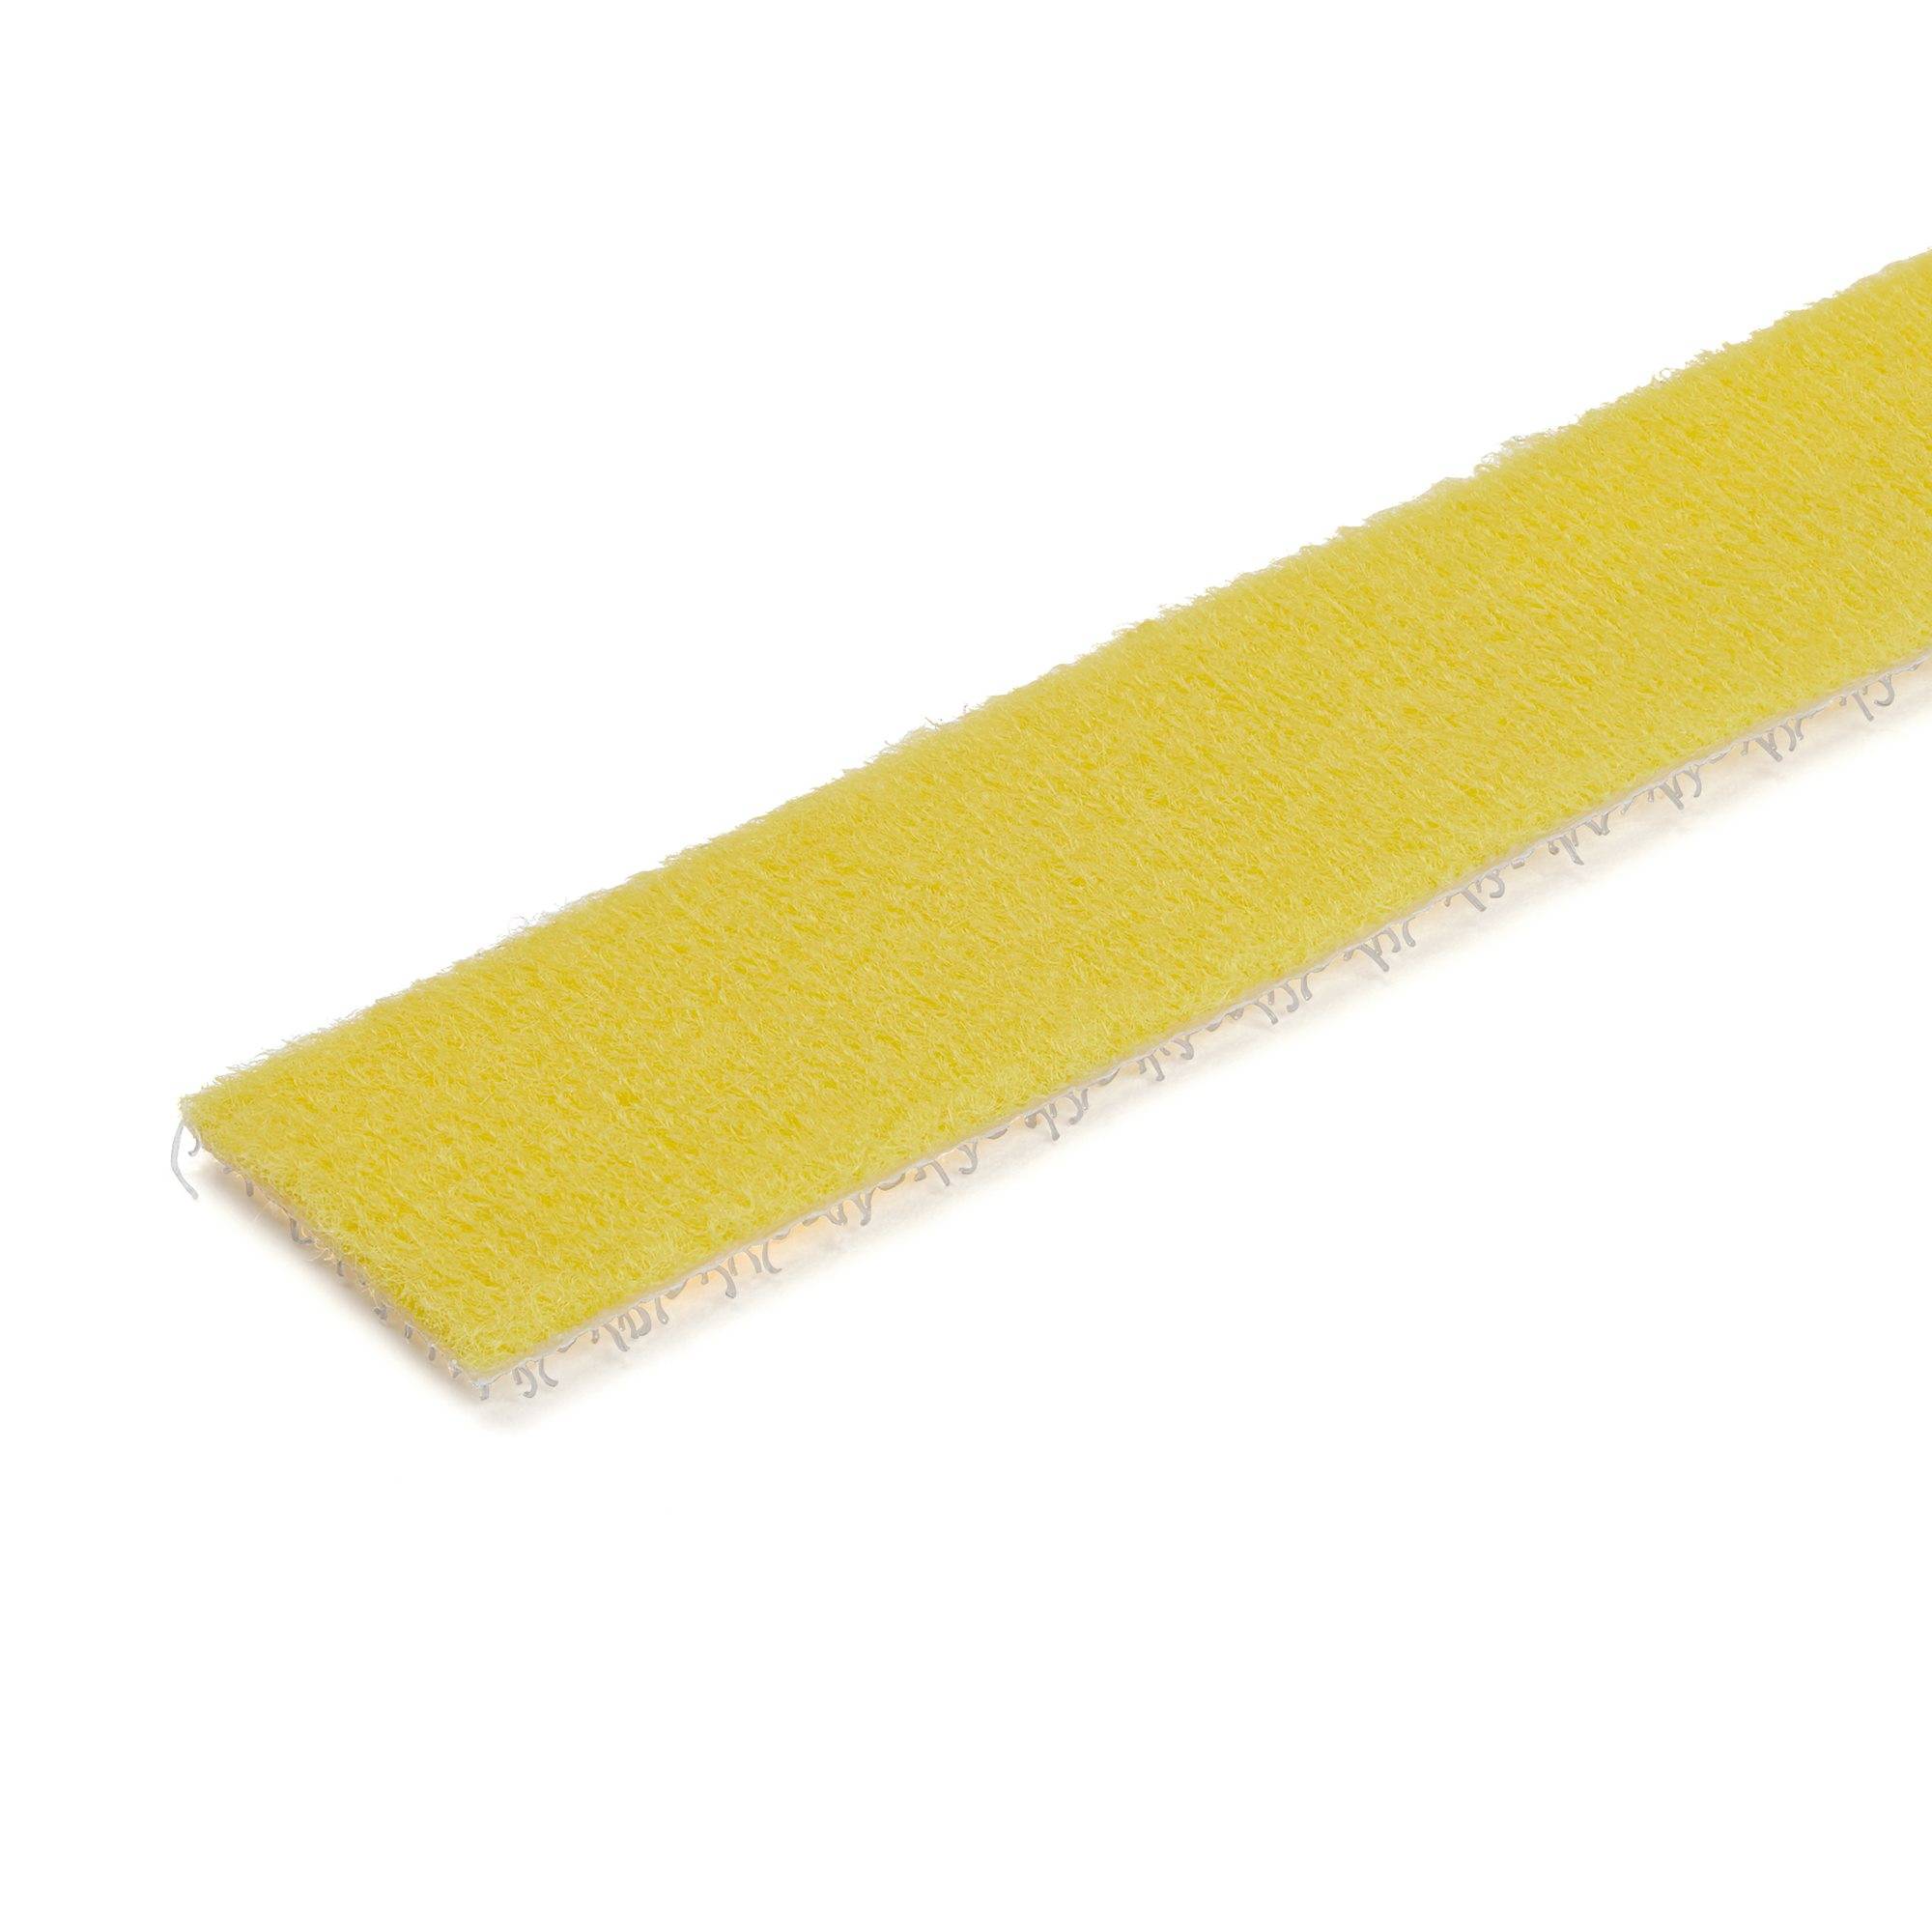 Rca Informatique - image du produit : 25FT. HOOK AND LOOP ROLL - YELLOW - RESUABLE